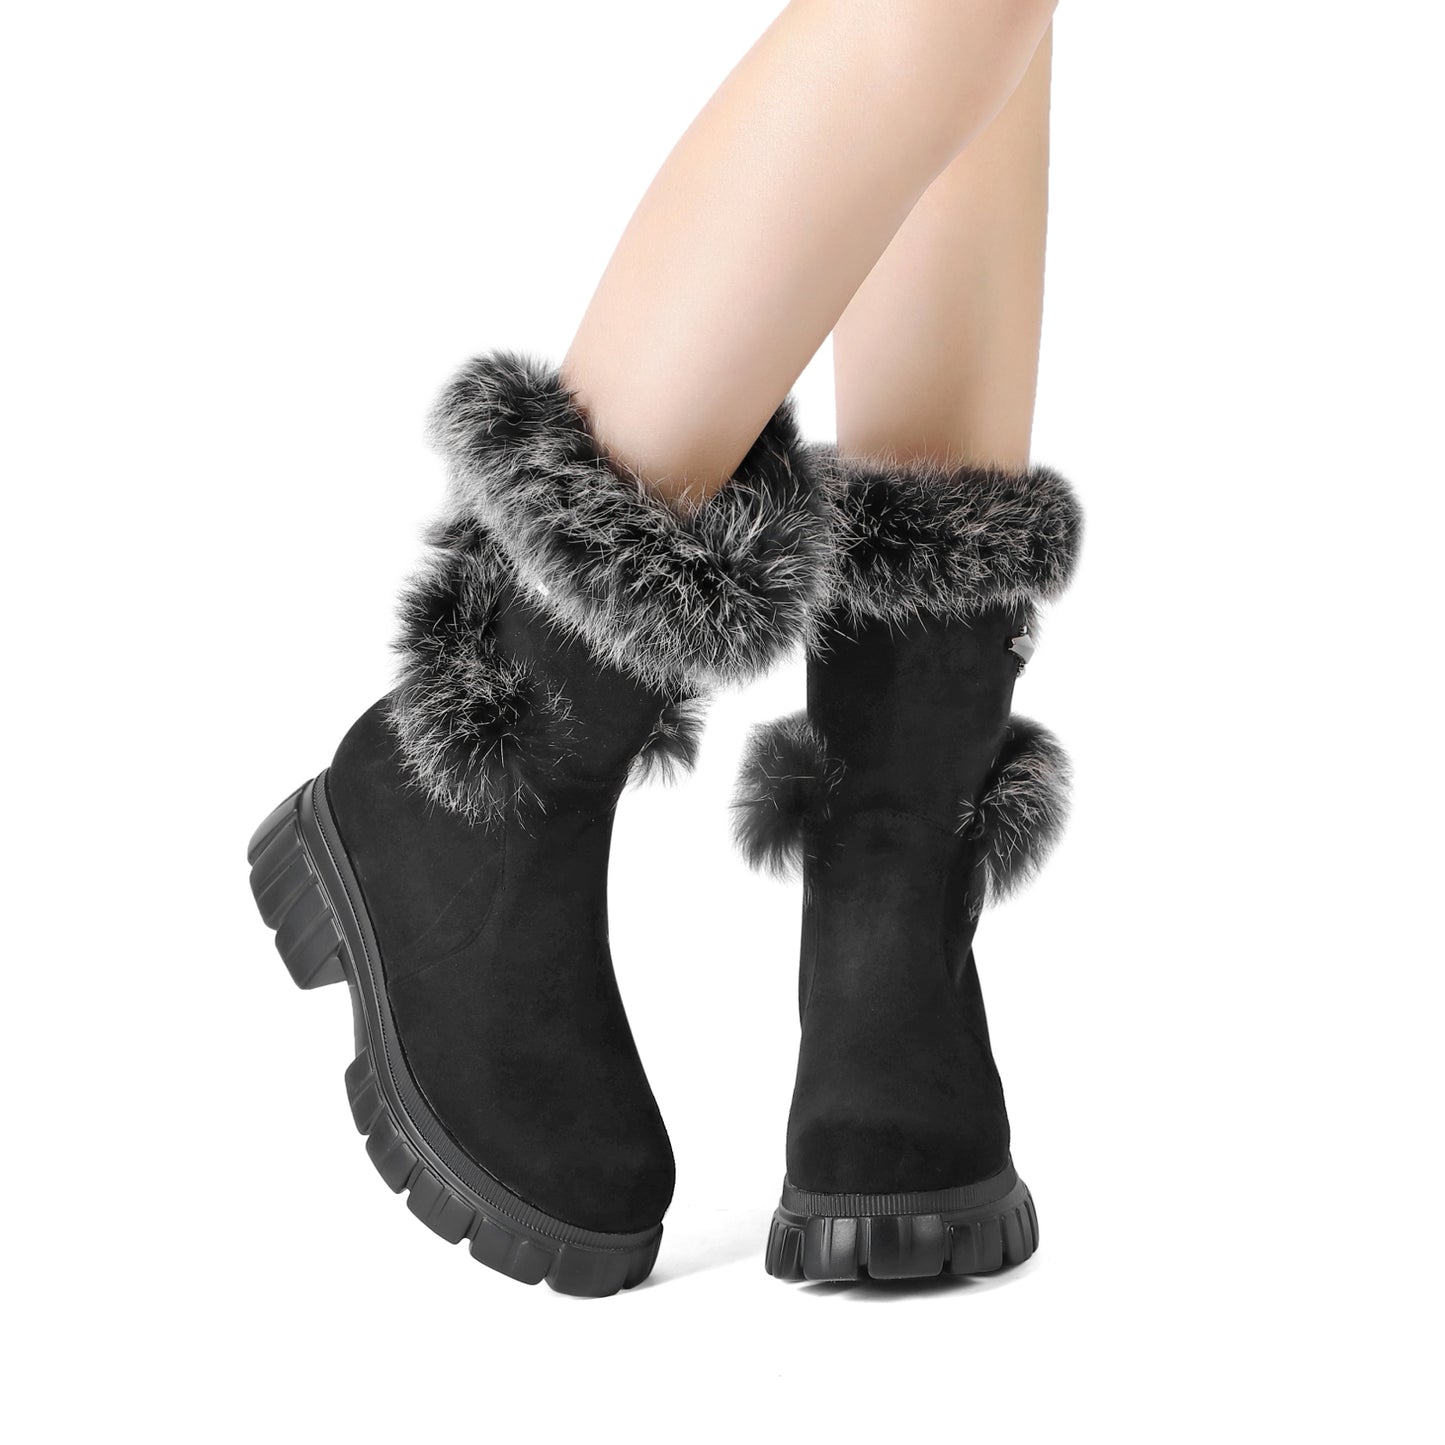 Women's Snow Ankle Boots With Genuine Rabbit Fur Sexy Furry Wedge mid calf Low Heel Winter Boots